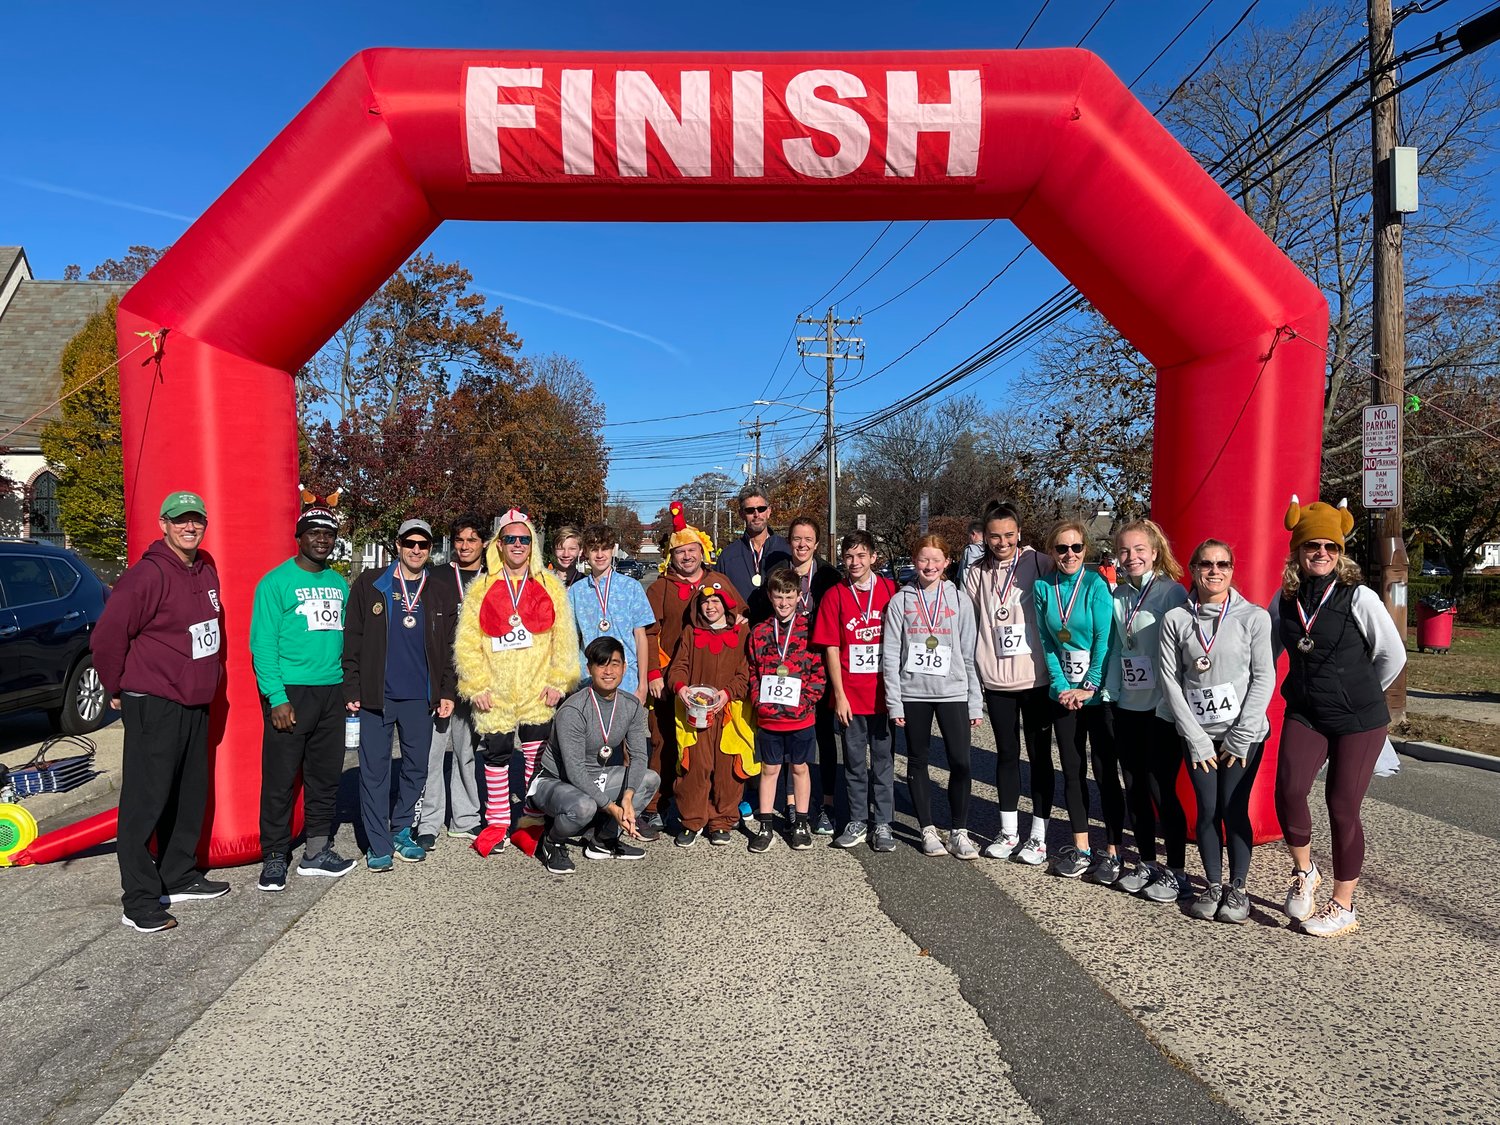 Church-goers, priests and community members sported turkey hats and seasonal costumes for the inaugural race held on Nov. 20 in Seaford.